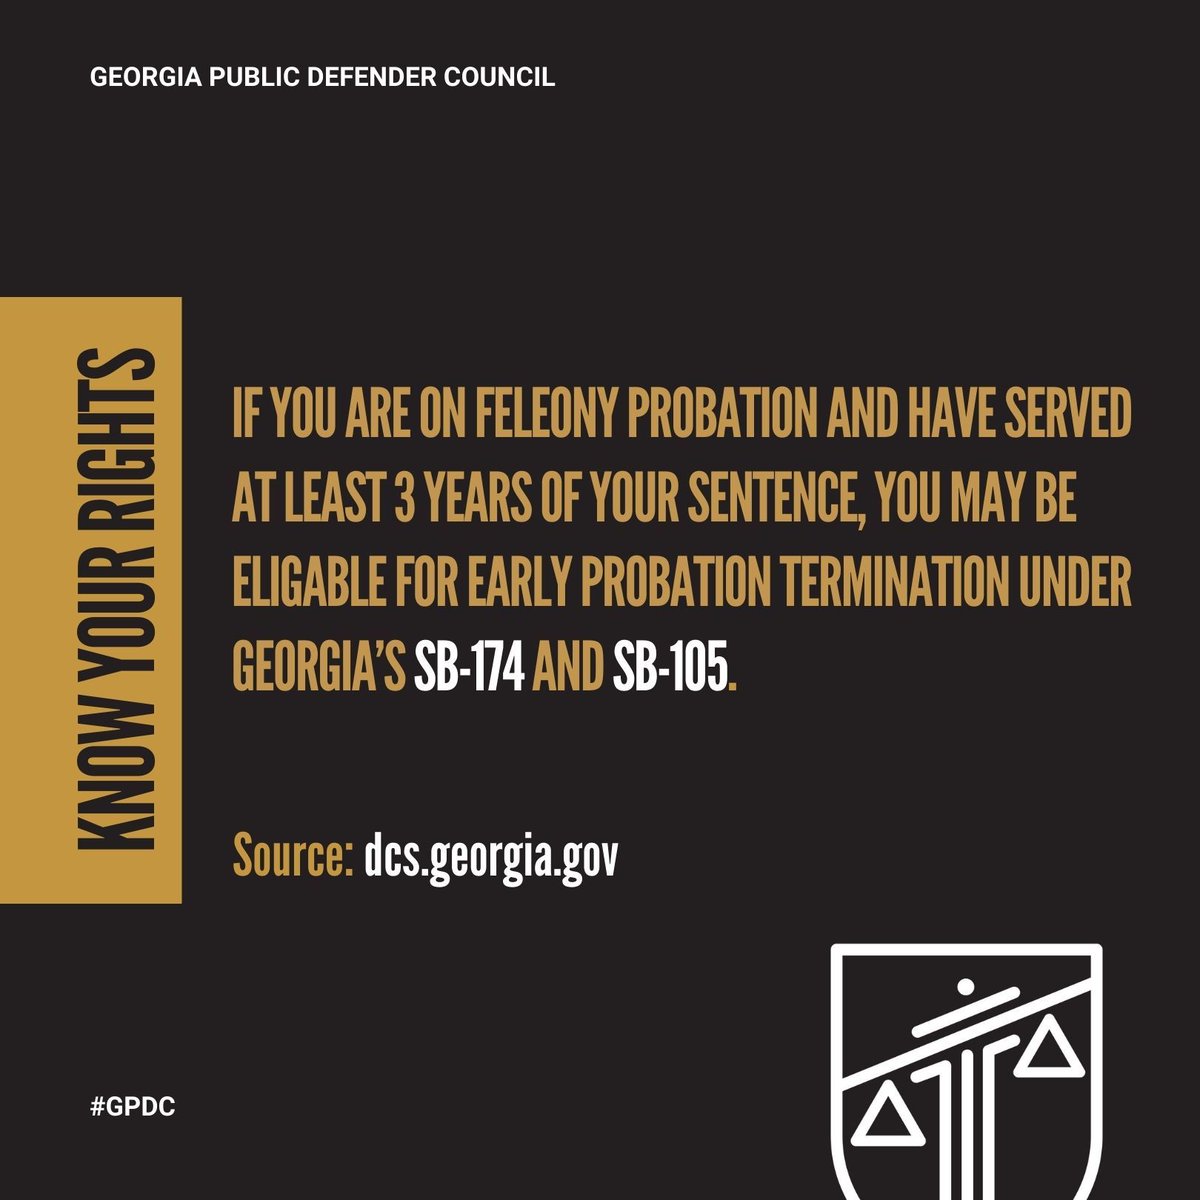 Empower yourself with knowledge! If you're serving felony probation in #Georgia and have completed at least 3 years, you may qualify for early termination under SB-174 and SB-105. #Share to spread the word! #KnowYourRights #GPDC #GeorgiaLaw